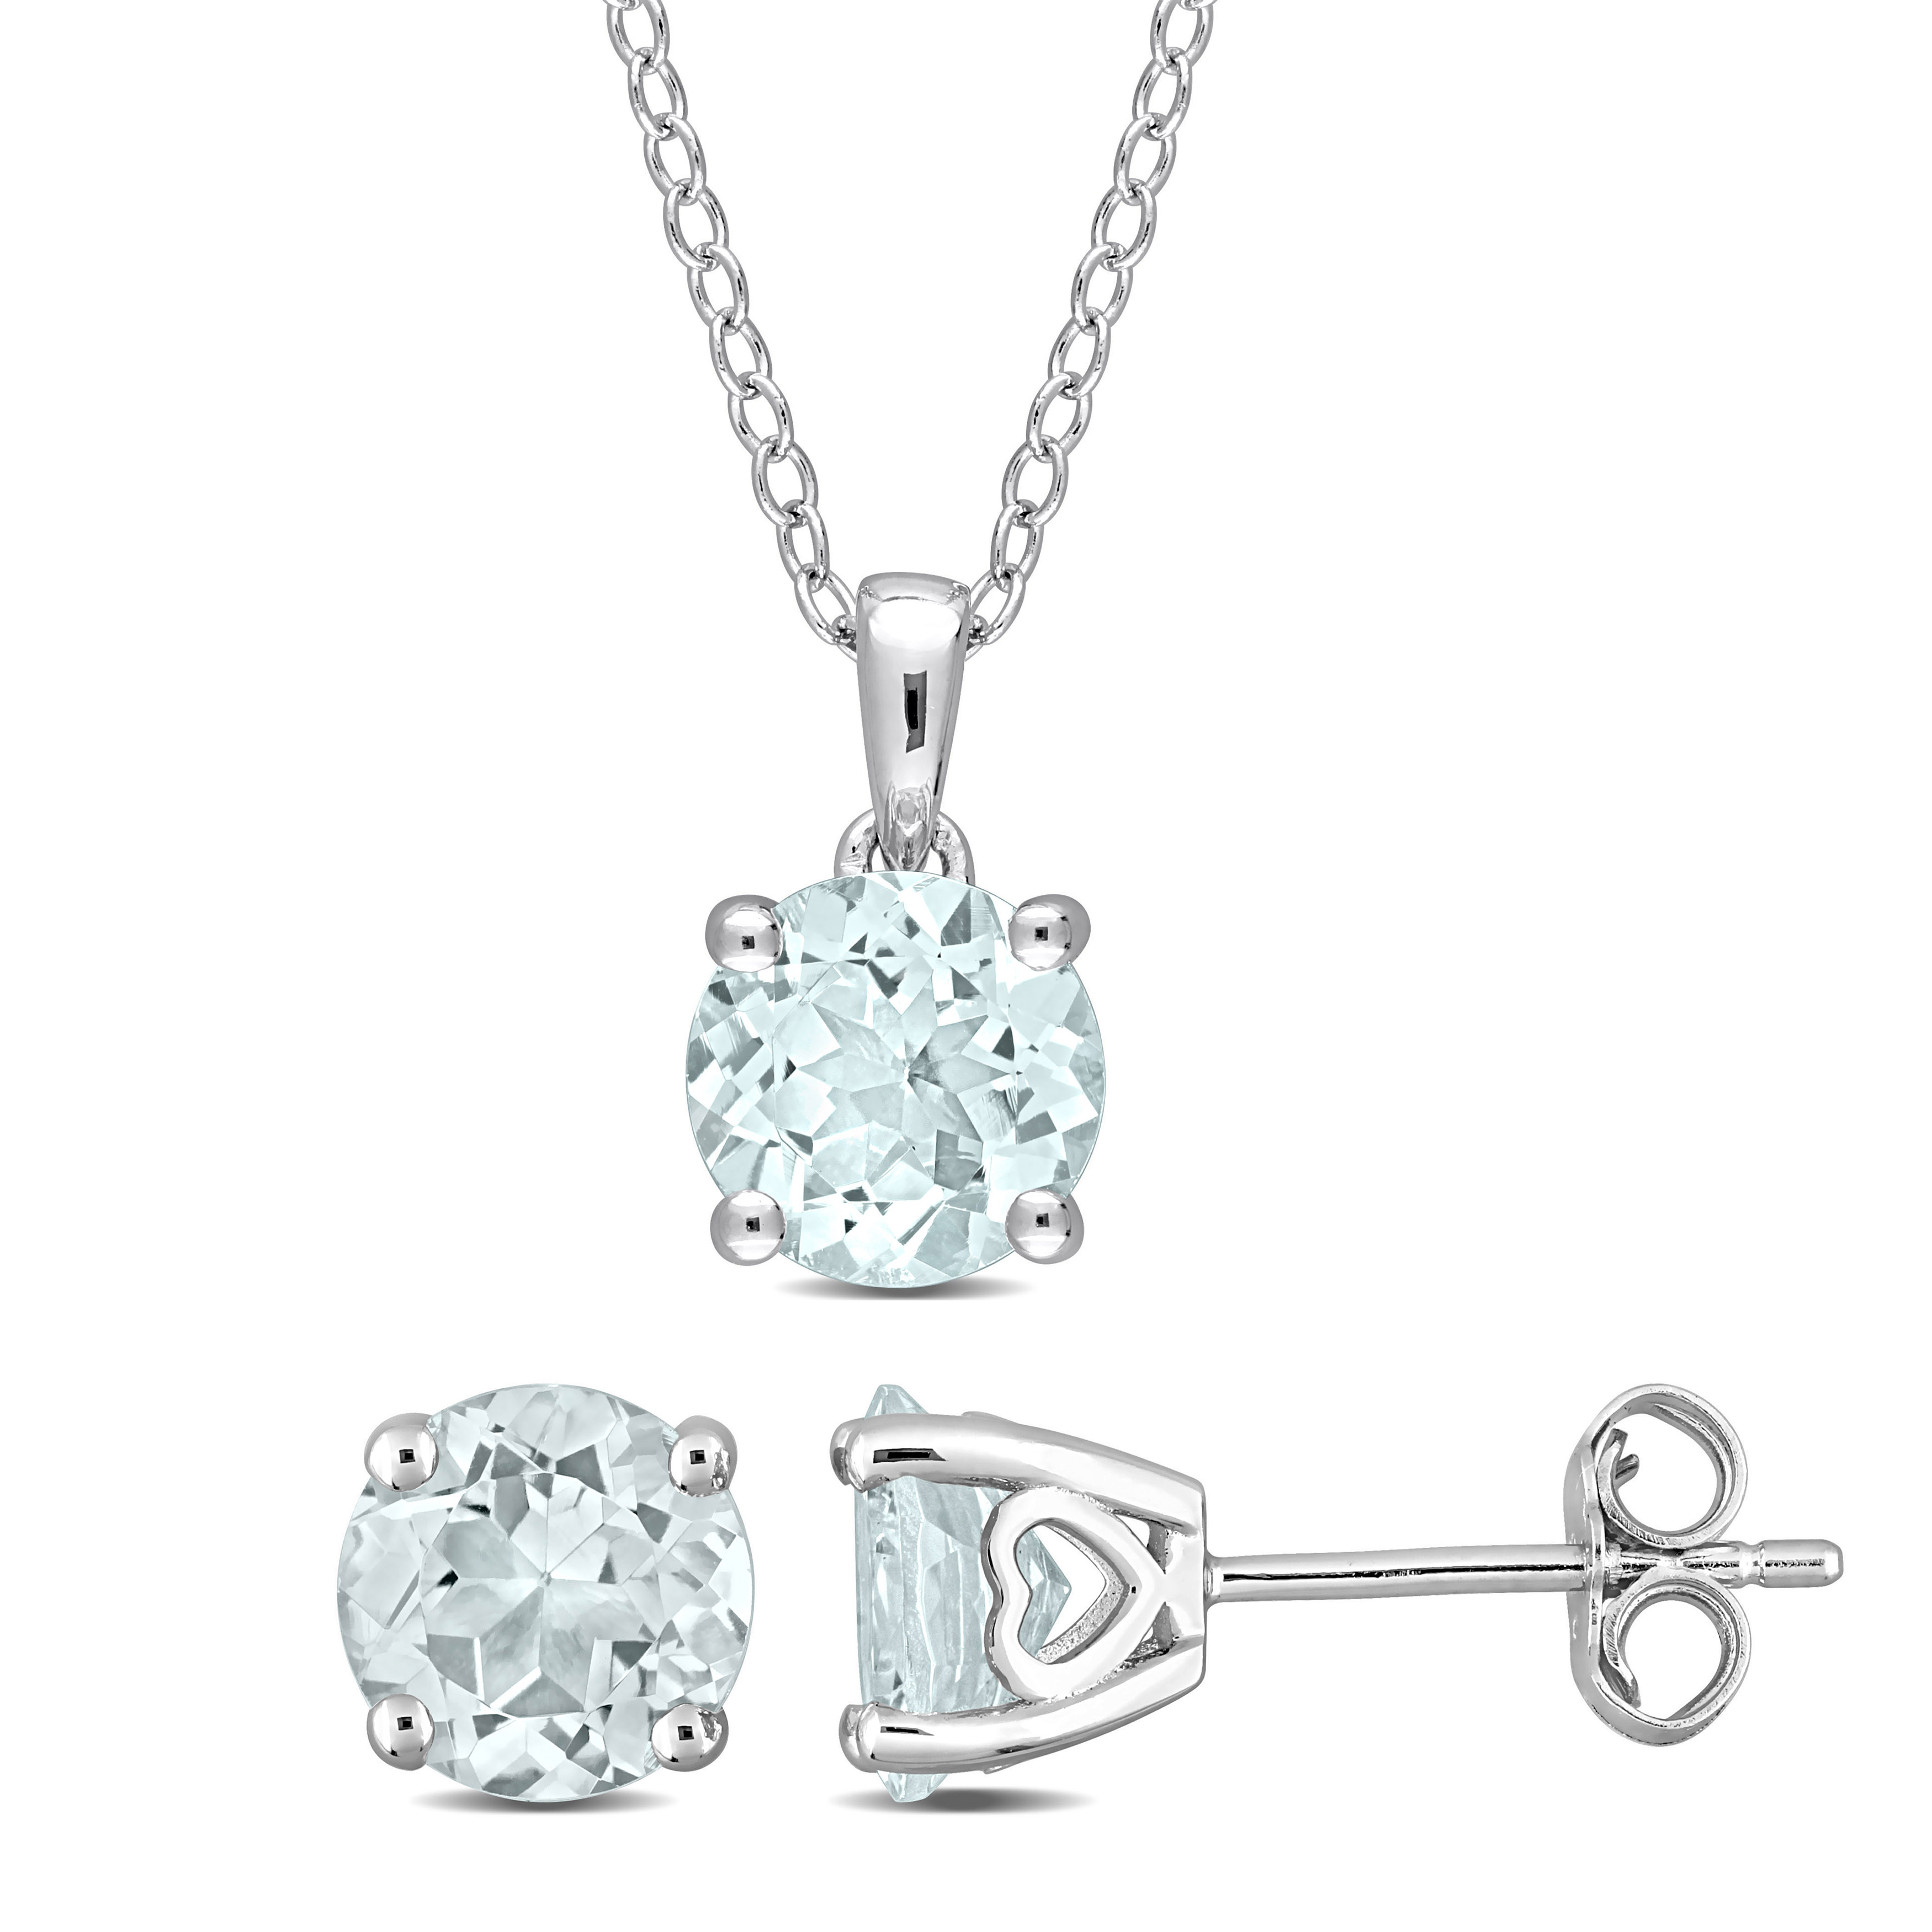 3 1/2 CT TGW Aquamarine Solitaire Stud Earring and Pendant with chain Set in Sterling Silver